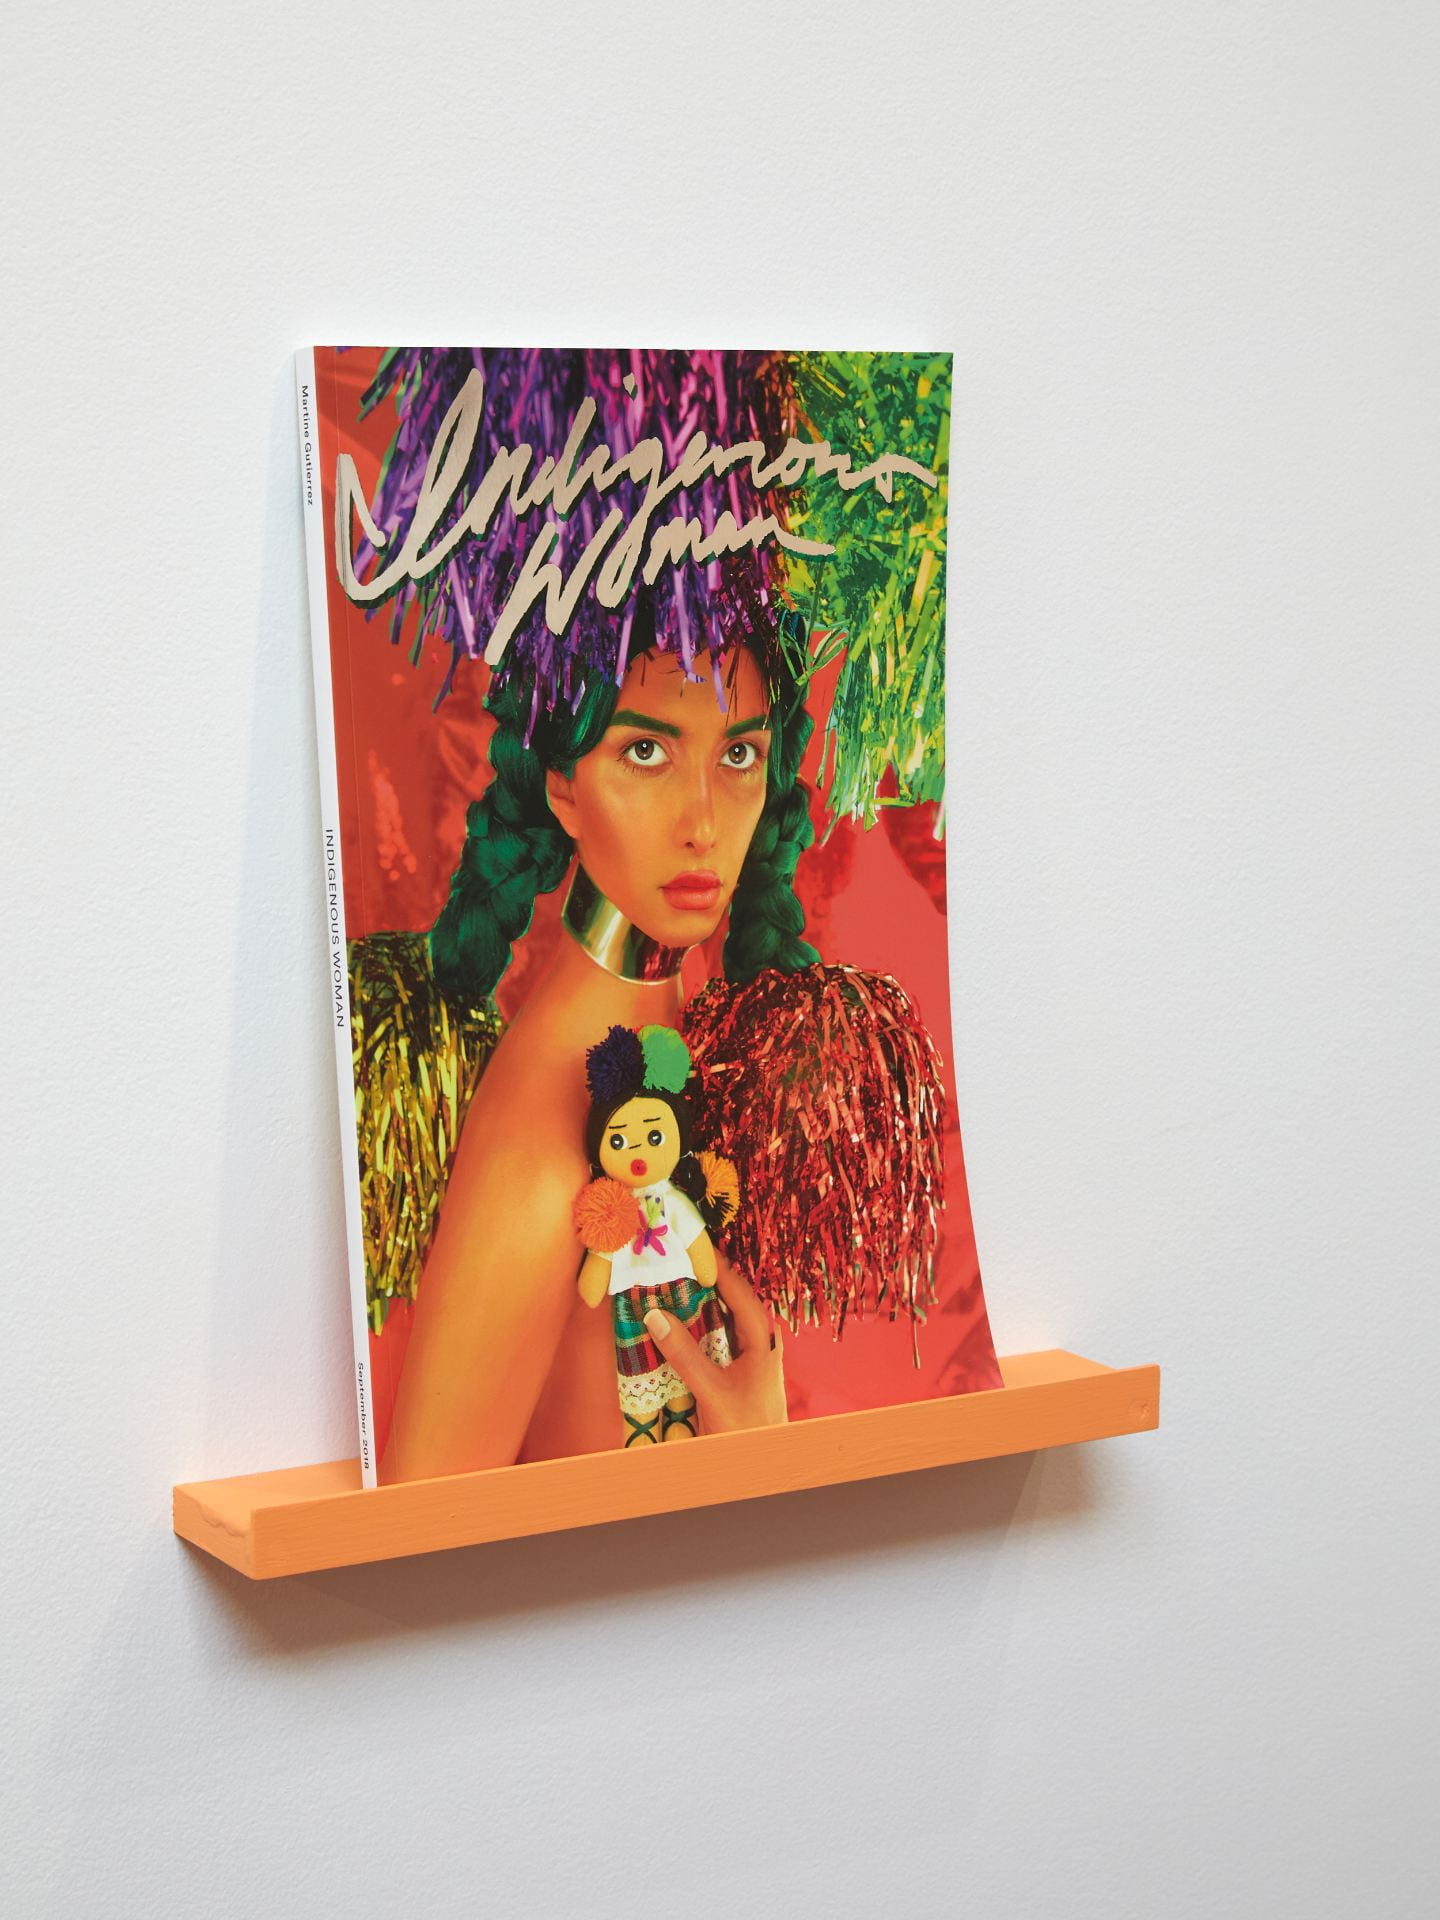 A magazine sitting on an orange bookshelf. The magazine has a woman on the front of it, and its title "Indigenous Woman".